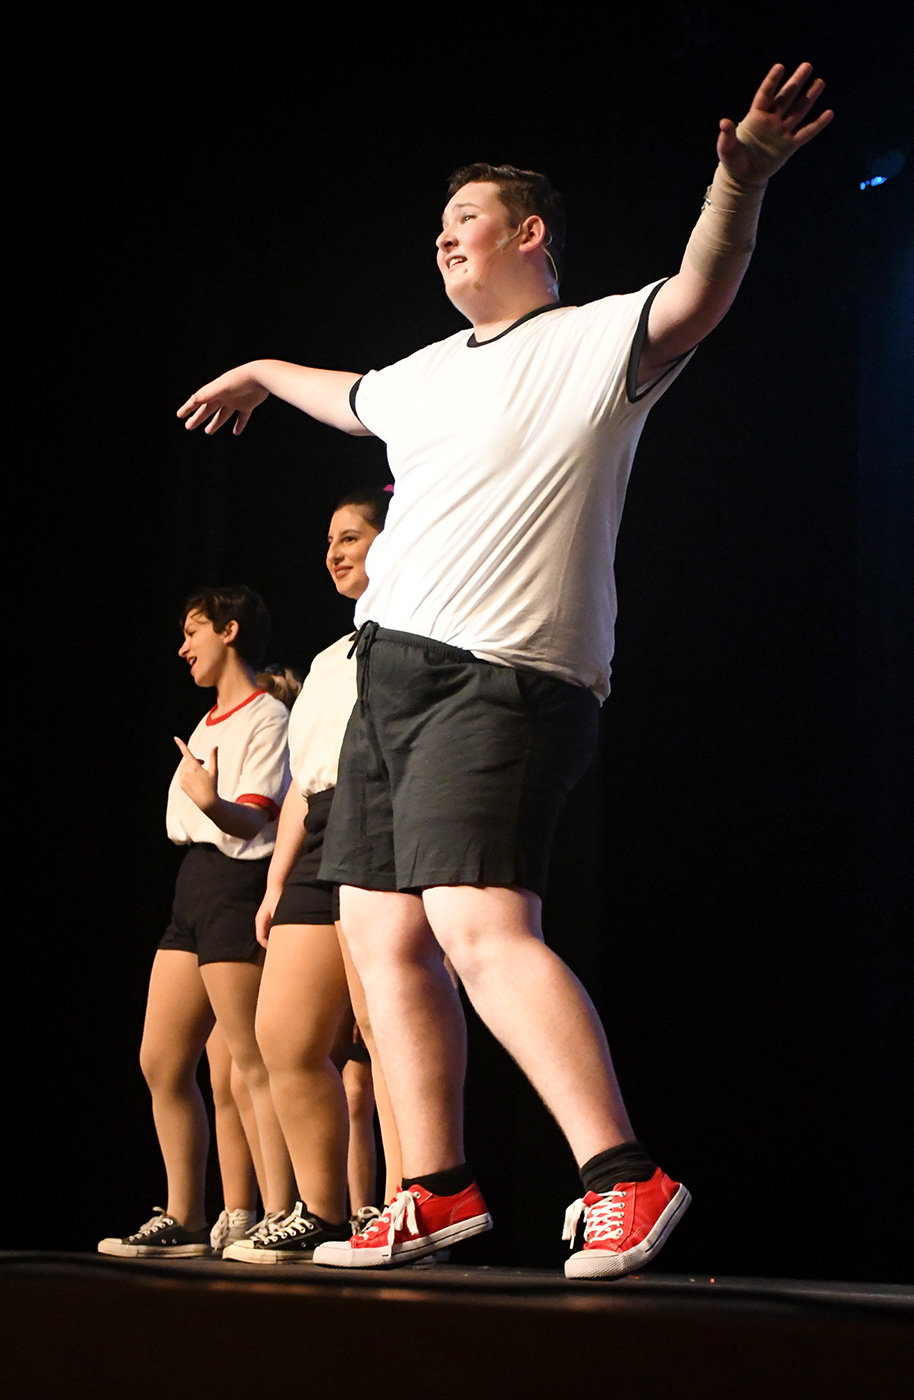 Joseph Schroeder, playing Ren McCormack, tried to persuade his classmates to dance.